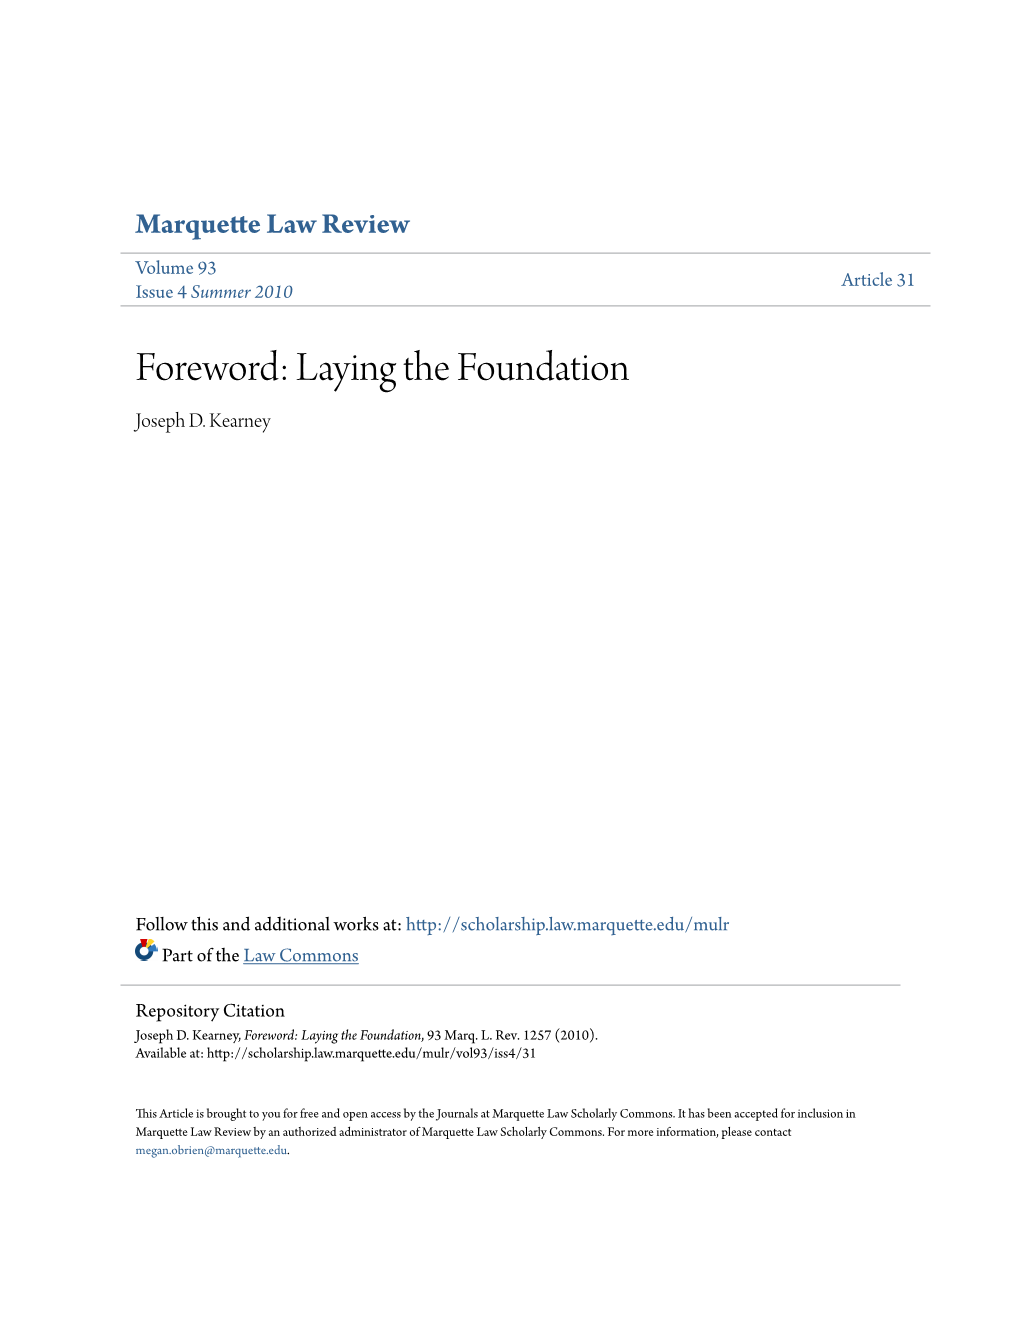 Foreword: Laying the Foundation Joseph D